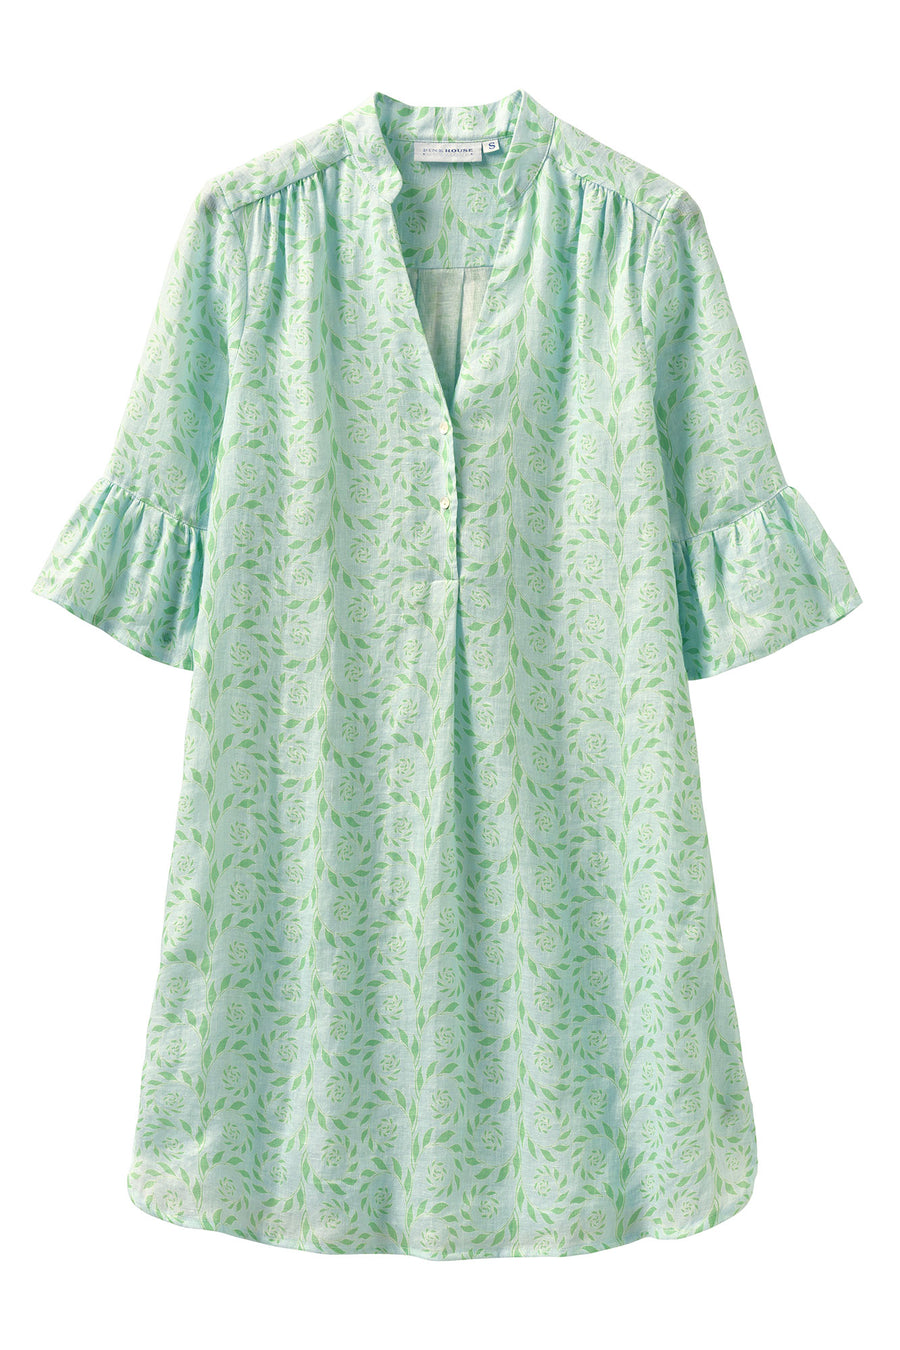 Womens linen beach dress with gathered sleeve in green and pale blue fern print